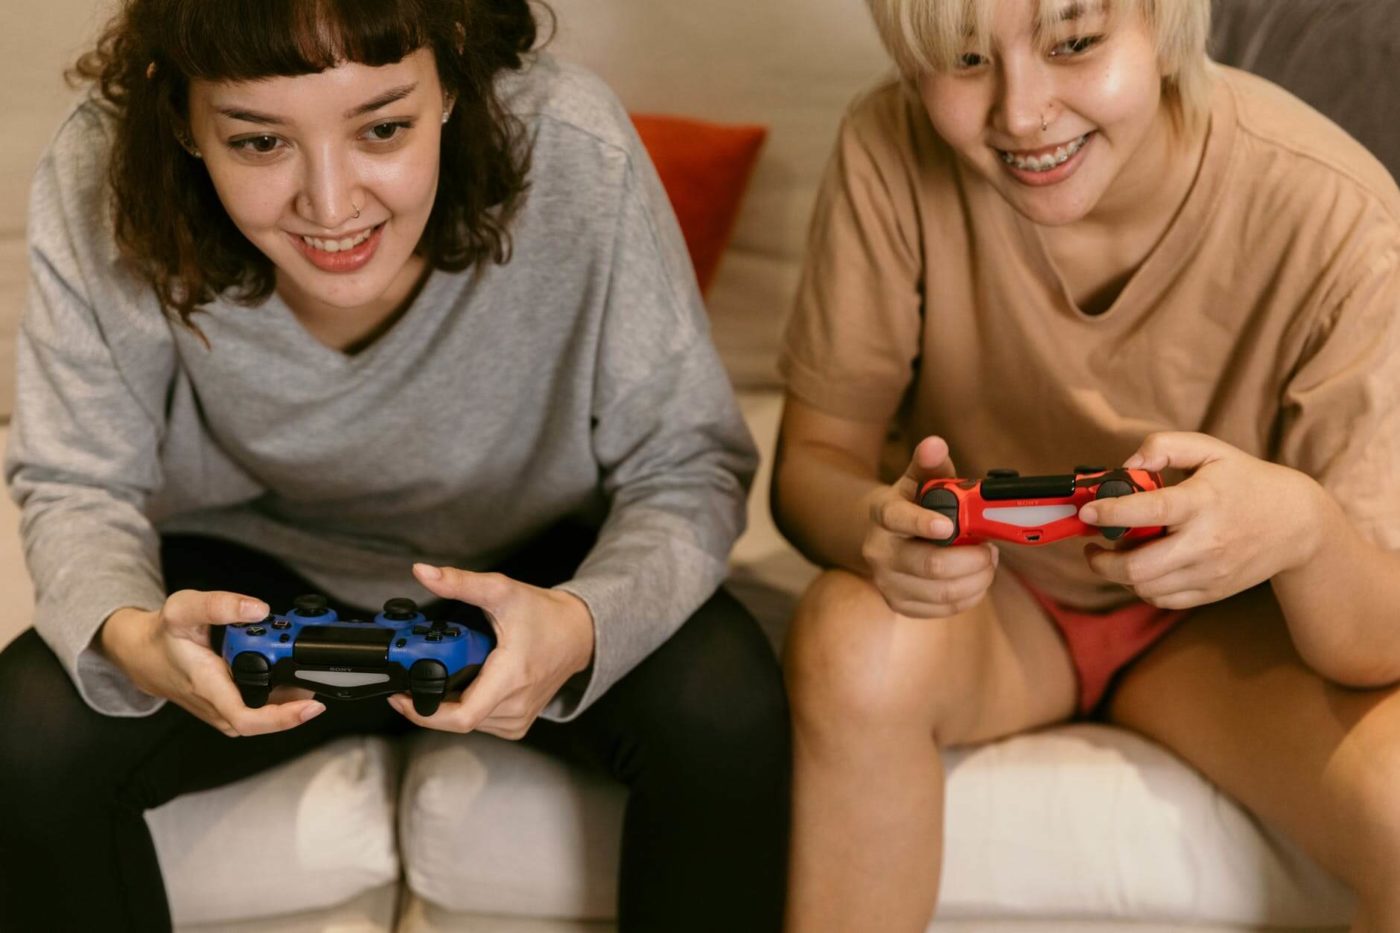 Girls relaxing and playing video games